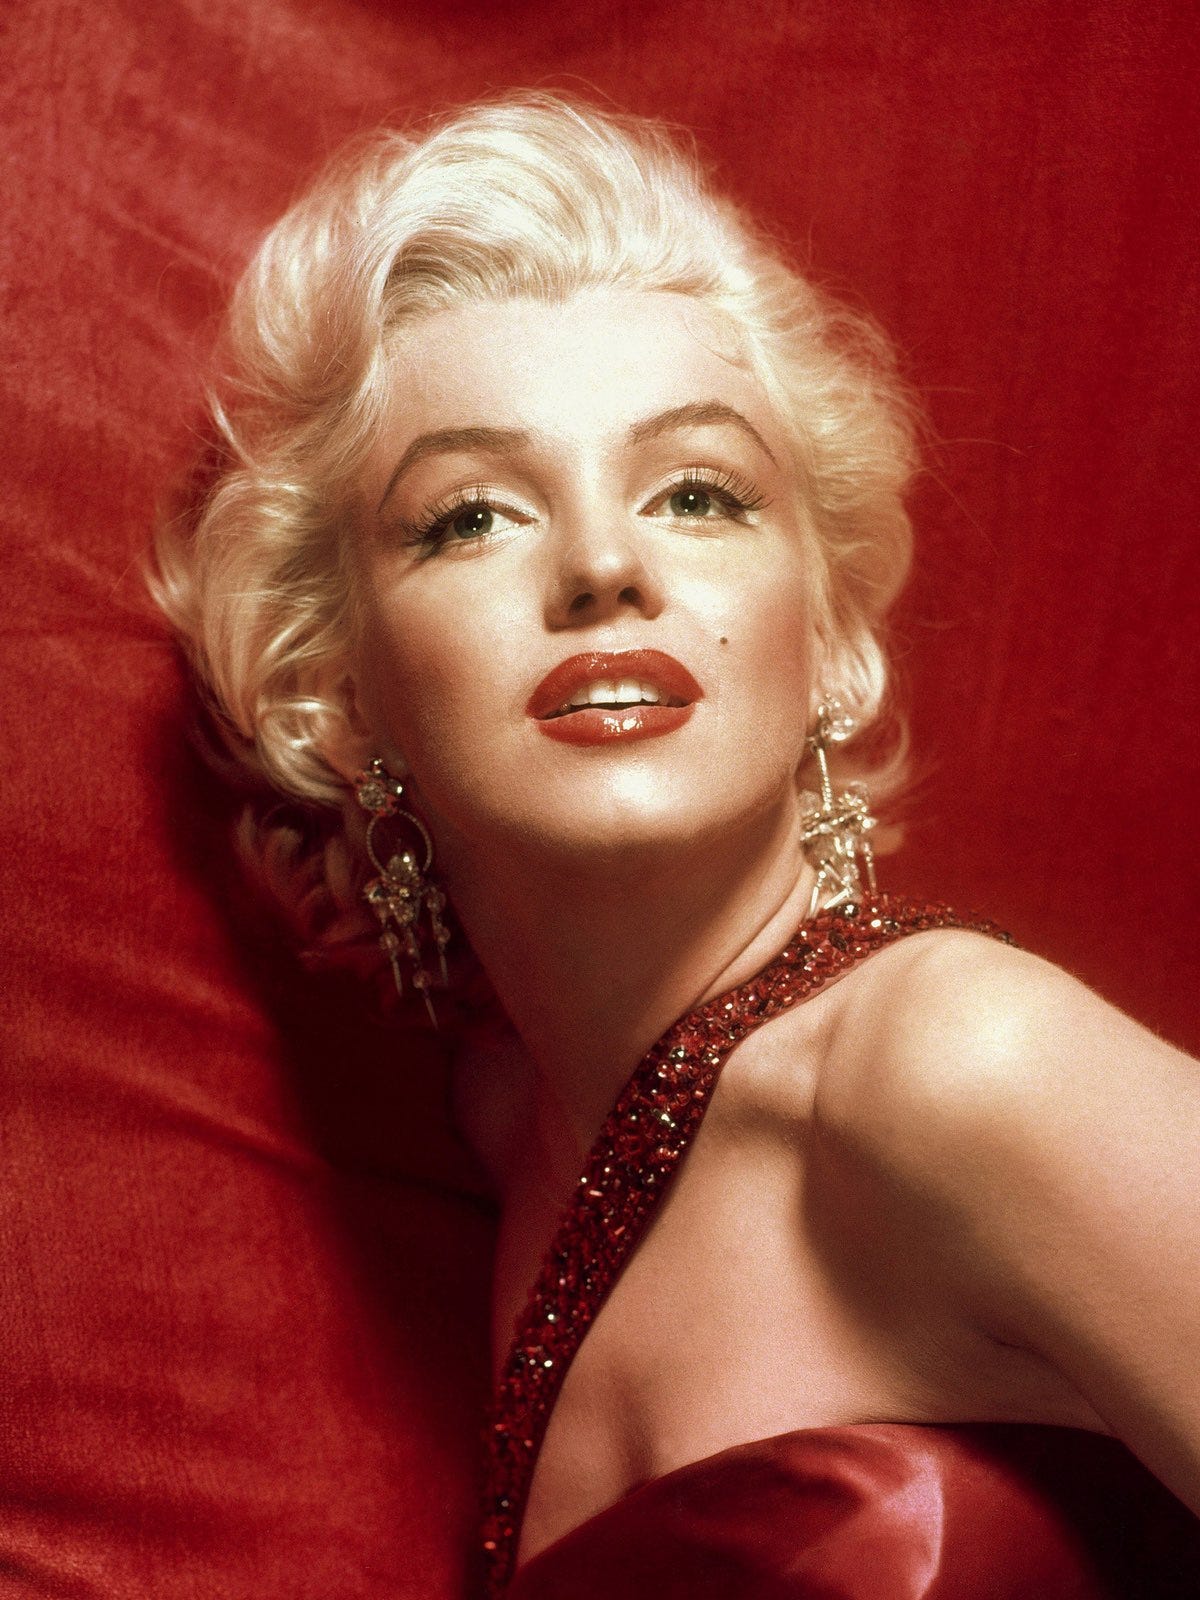 Marilyn Monroe was a movie icon by the time of her in 1962 credit